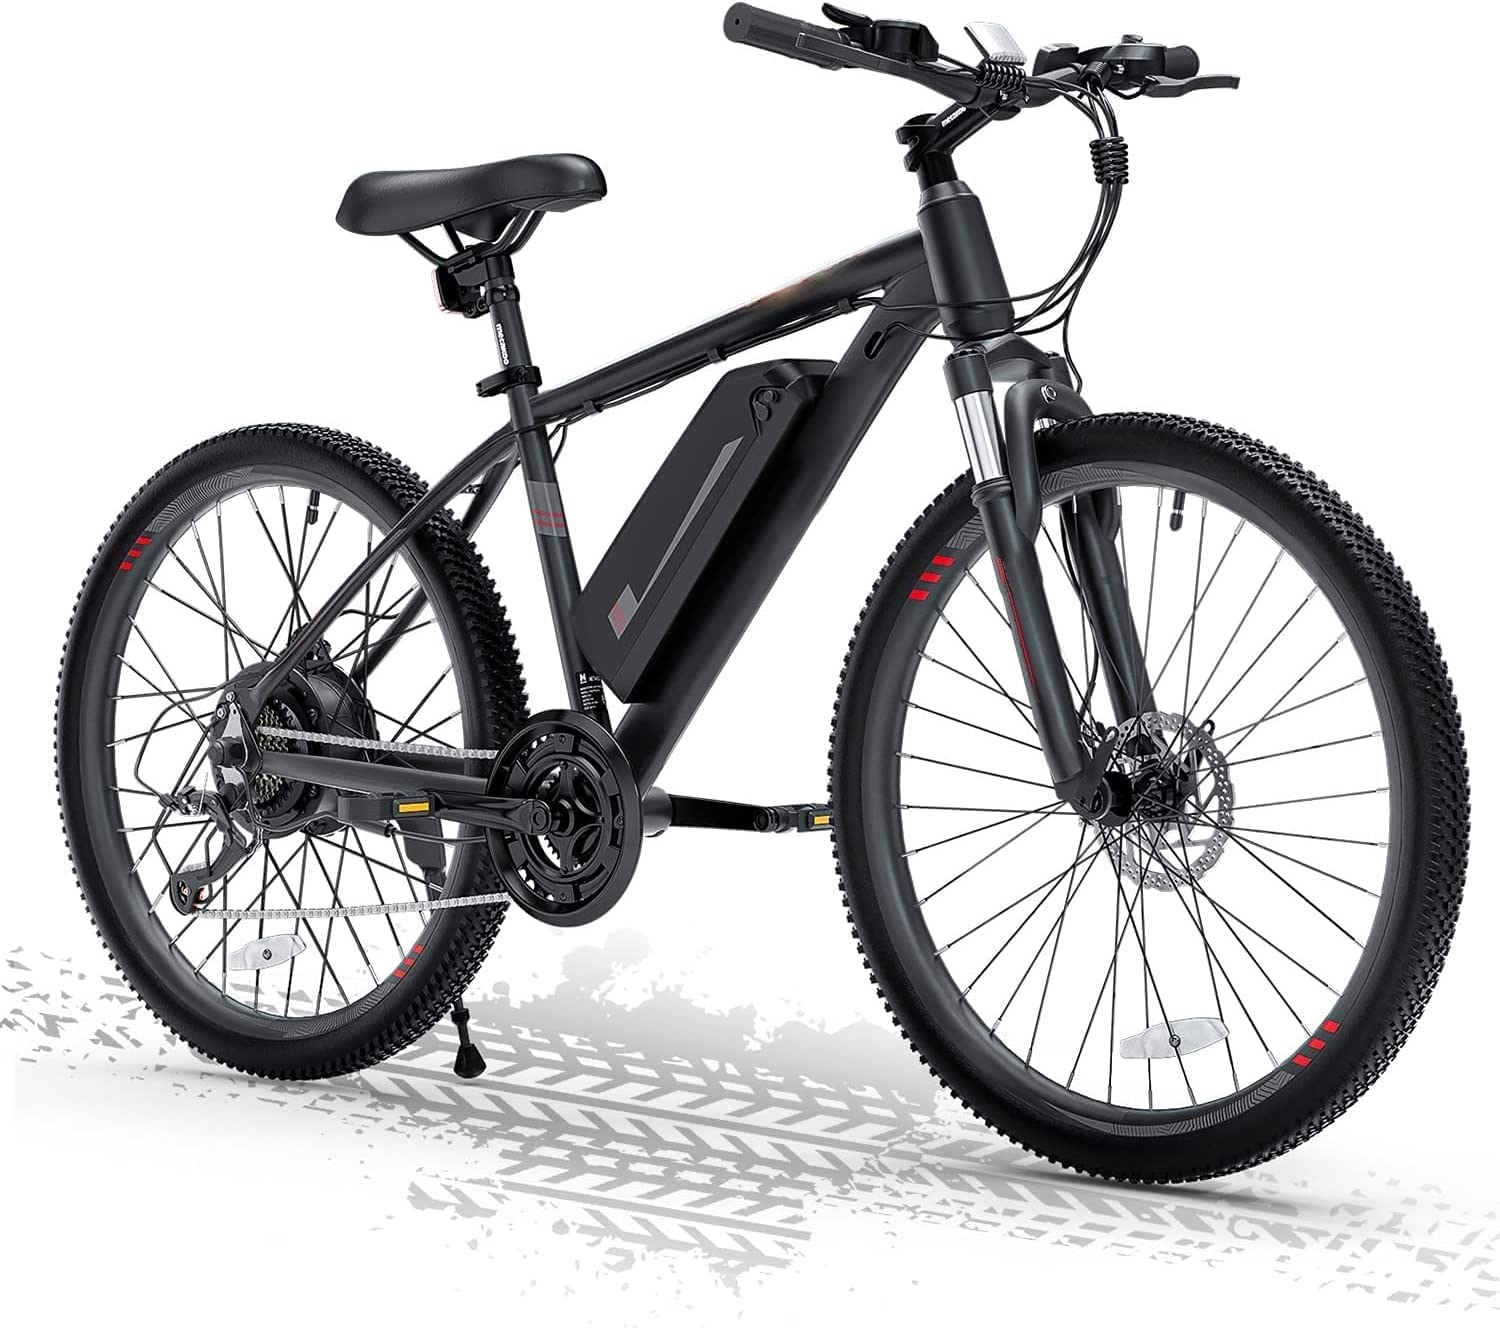 Electric Bike for Adults EBike, 2X Faster Charge 350W BAFANG Motor, 20MPH Mountain Bike 10.4AH Battery, LCD Display, Suspension Fork & Shimano 21 Speed Gears